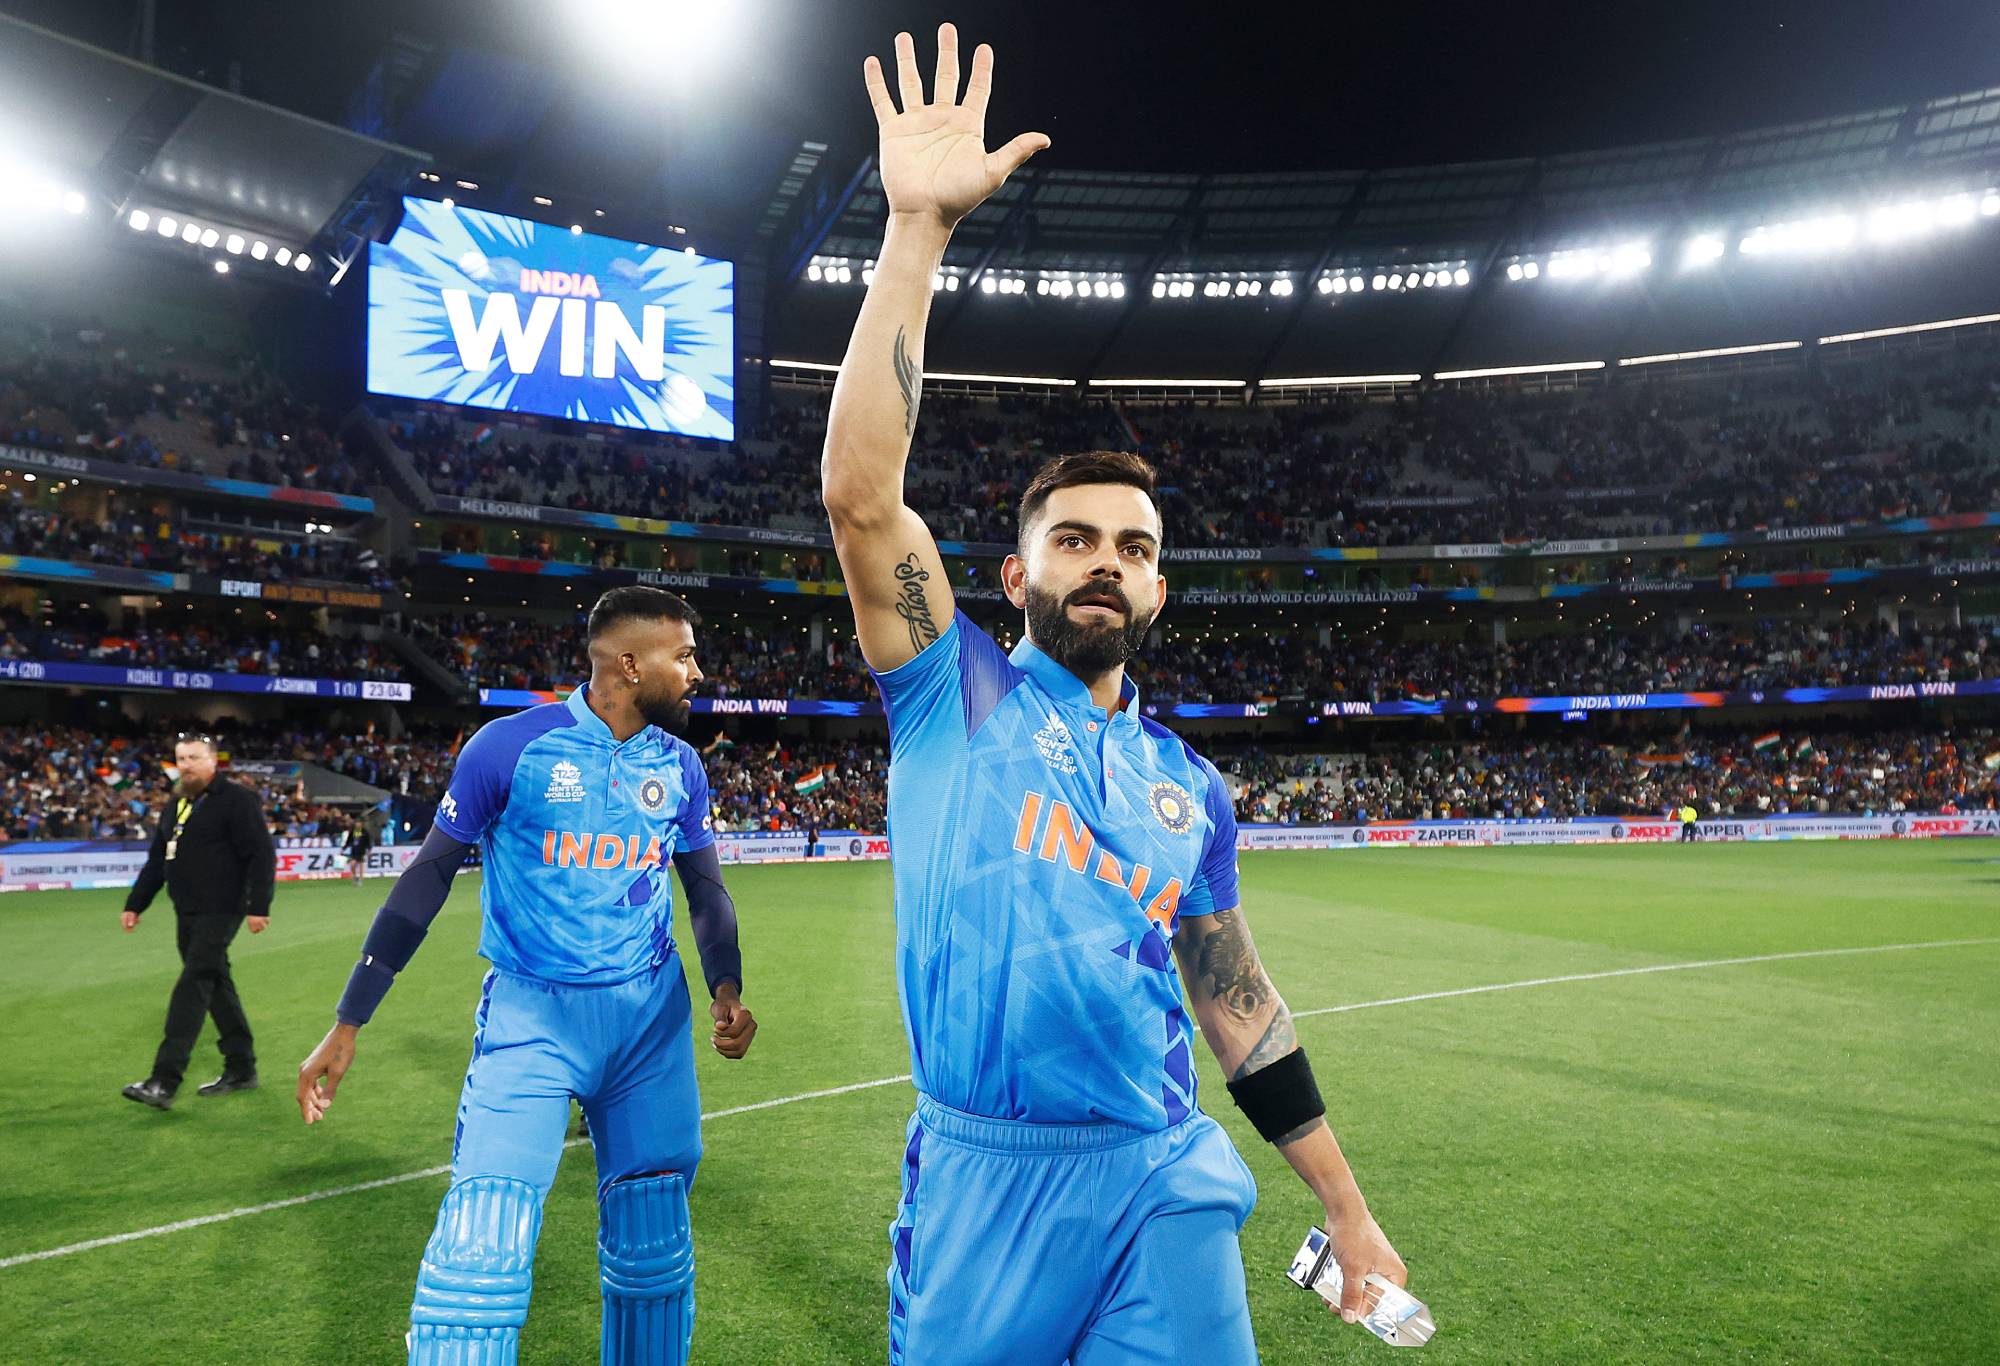 MELBOURNE, AUSTRALIA - OCTOBER 23: Virat Kohli of India celebrates after the ICC Men's T20 World Cup match between India and Pakistan at Melbourne Cricket Ground on October 23, 2022 in Melbourne, Australia. (Photo by Daniel Pockett-ICC/ICC via Getty Images)